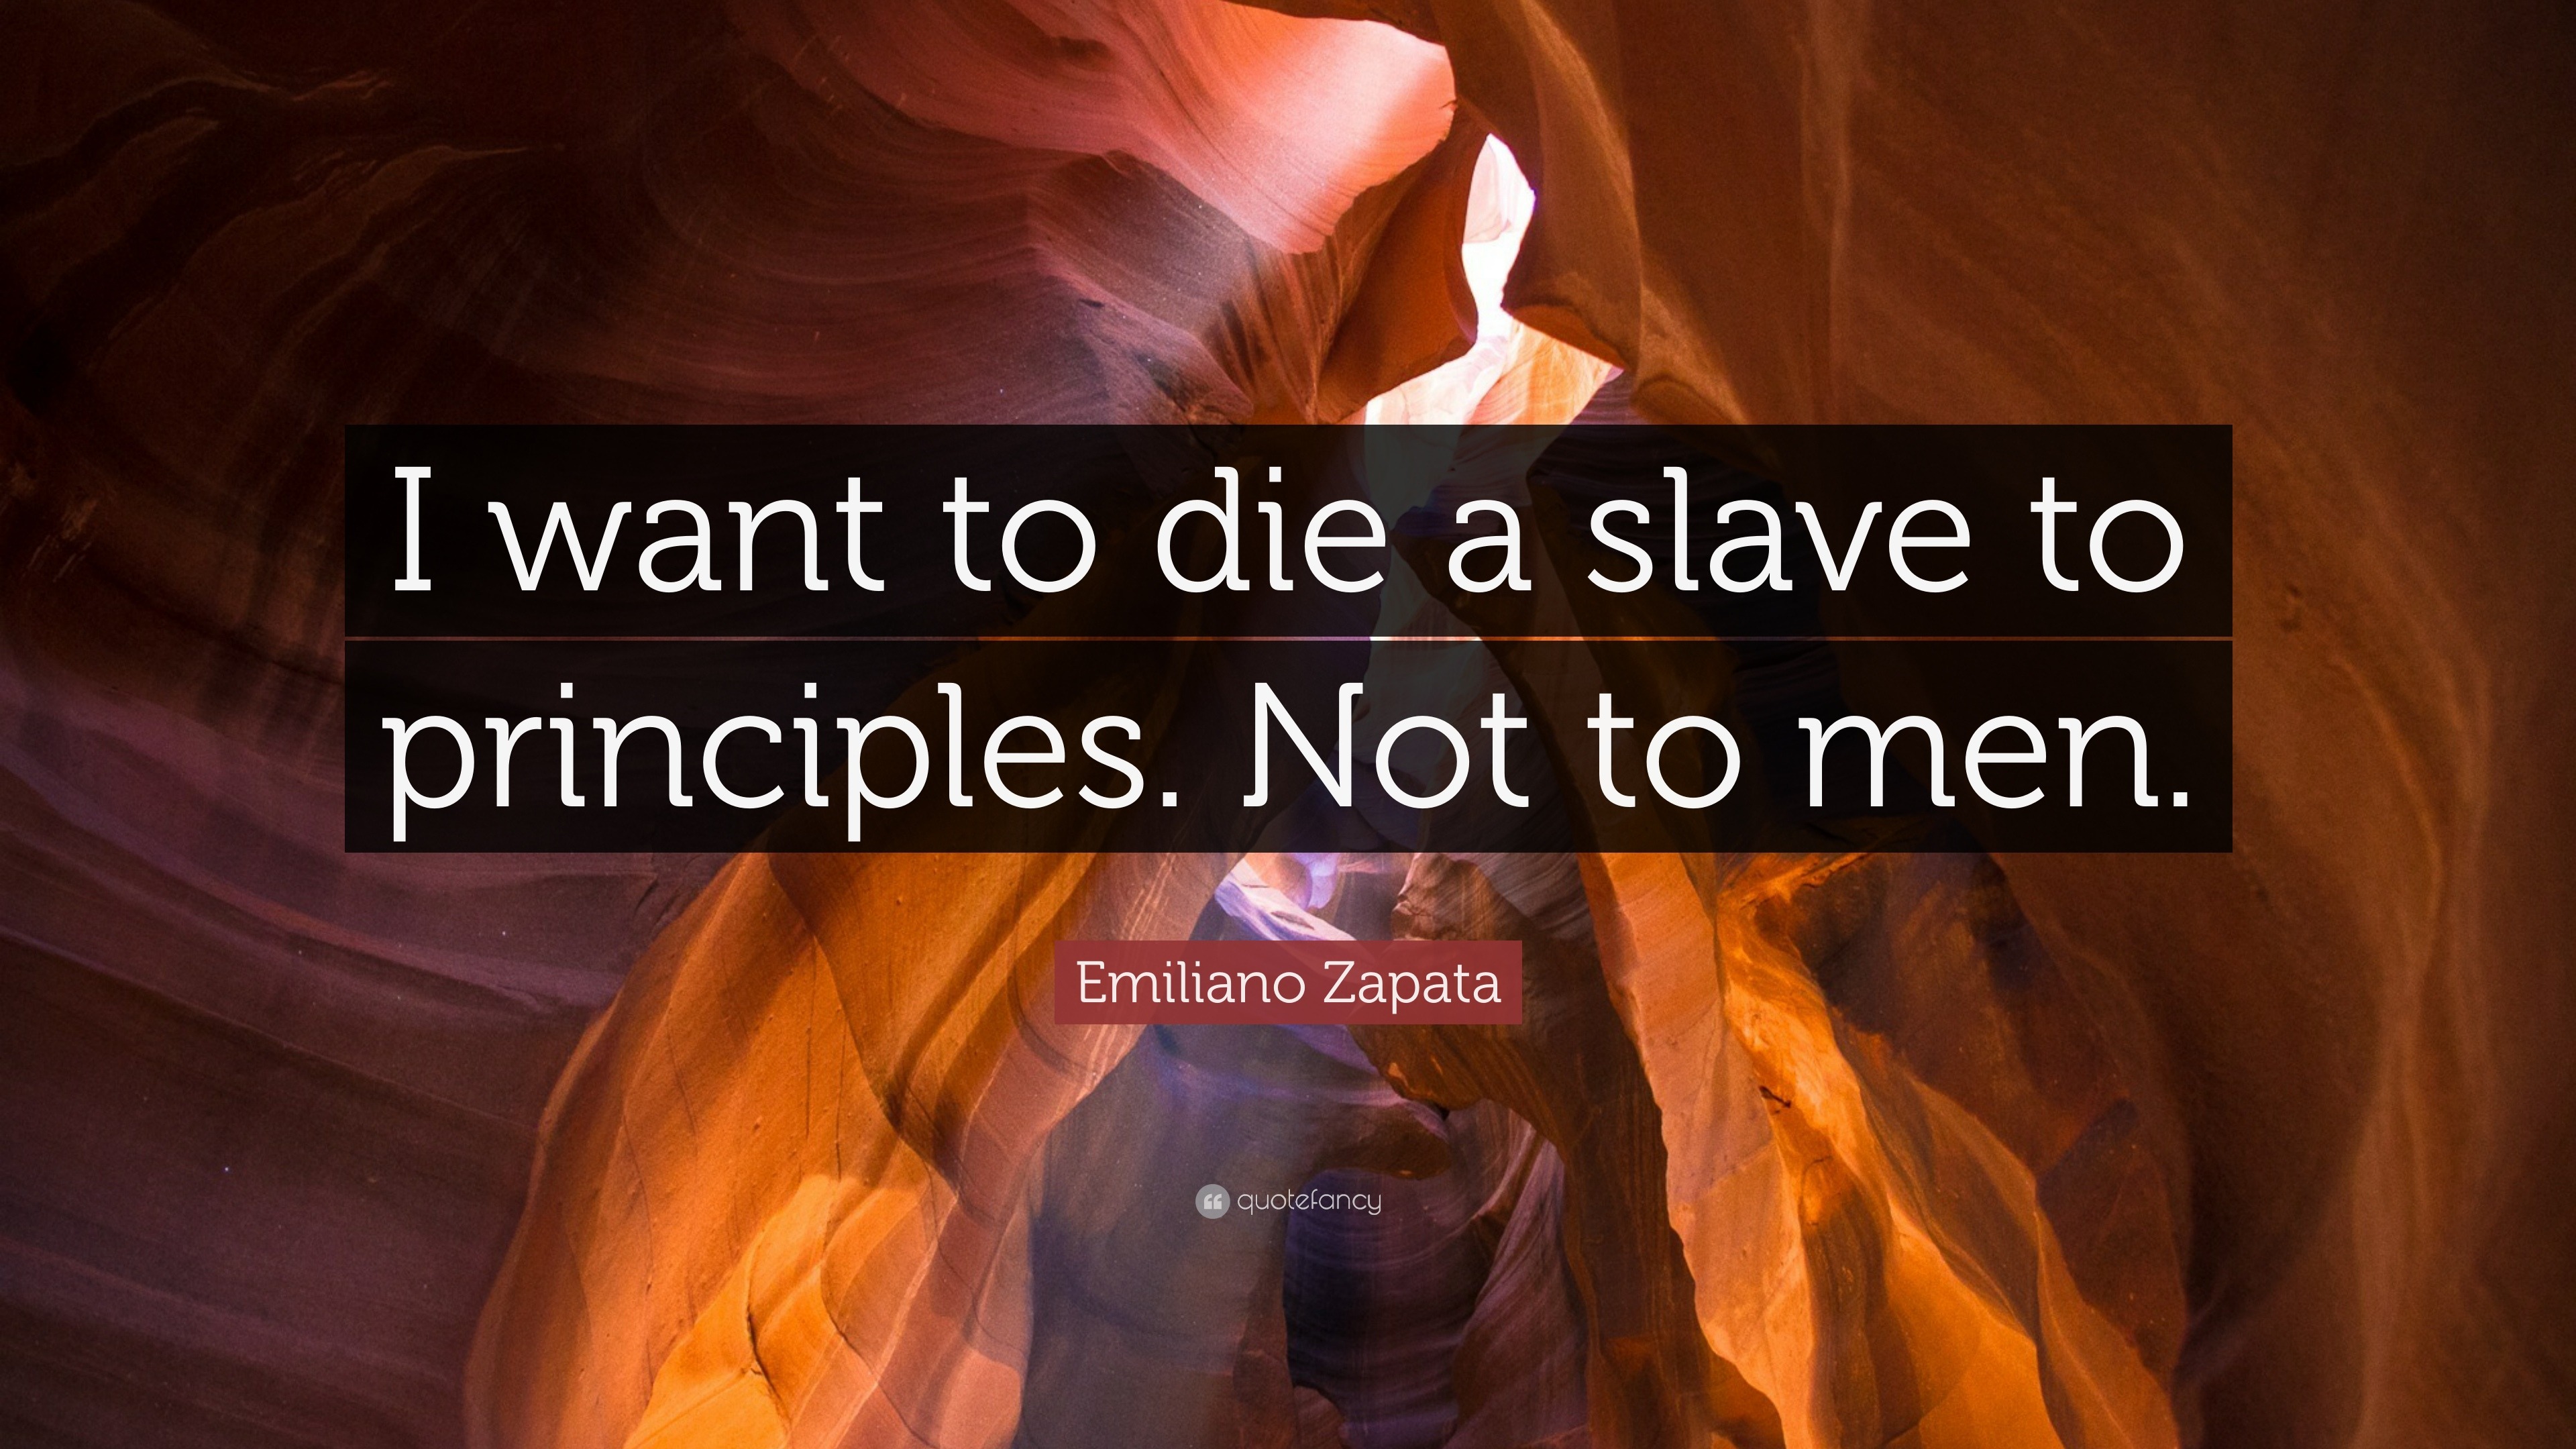 Emiliano Zapata Quotes (10 wallpapers) - Quotefancy